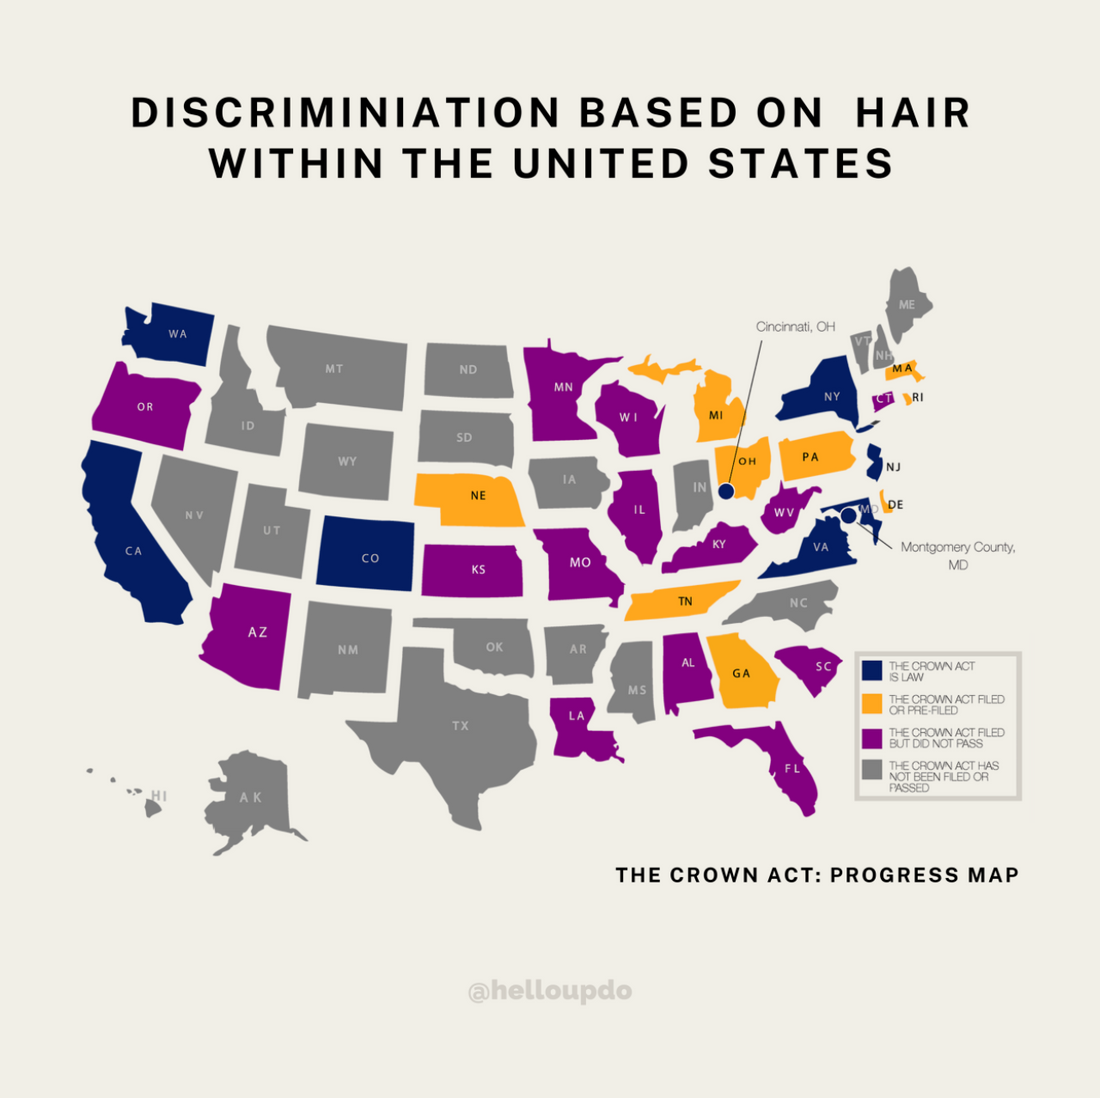 DISCRIMINATION BASED ON HAIR IN THE UNITED STATES